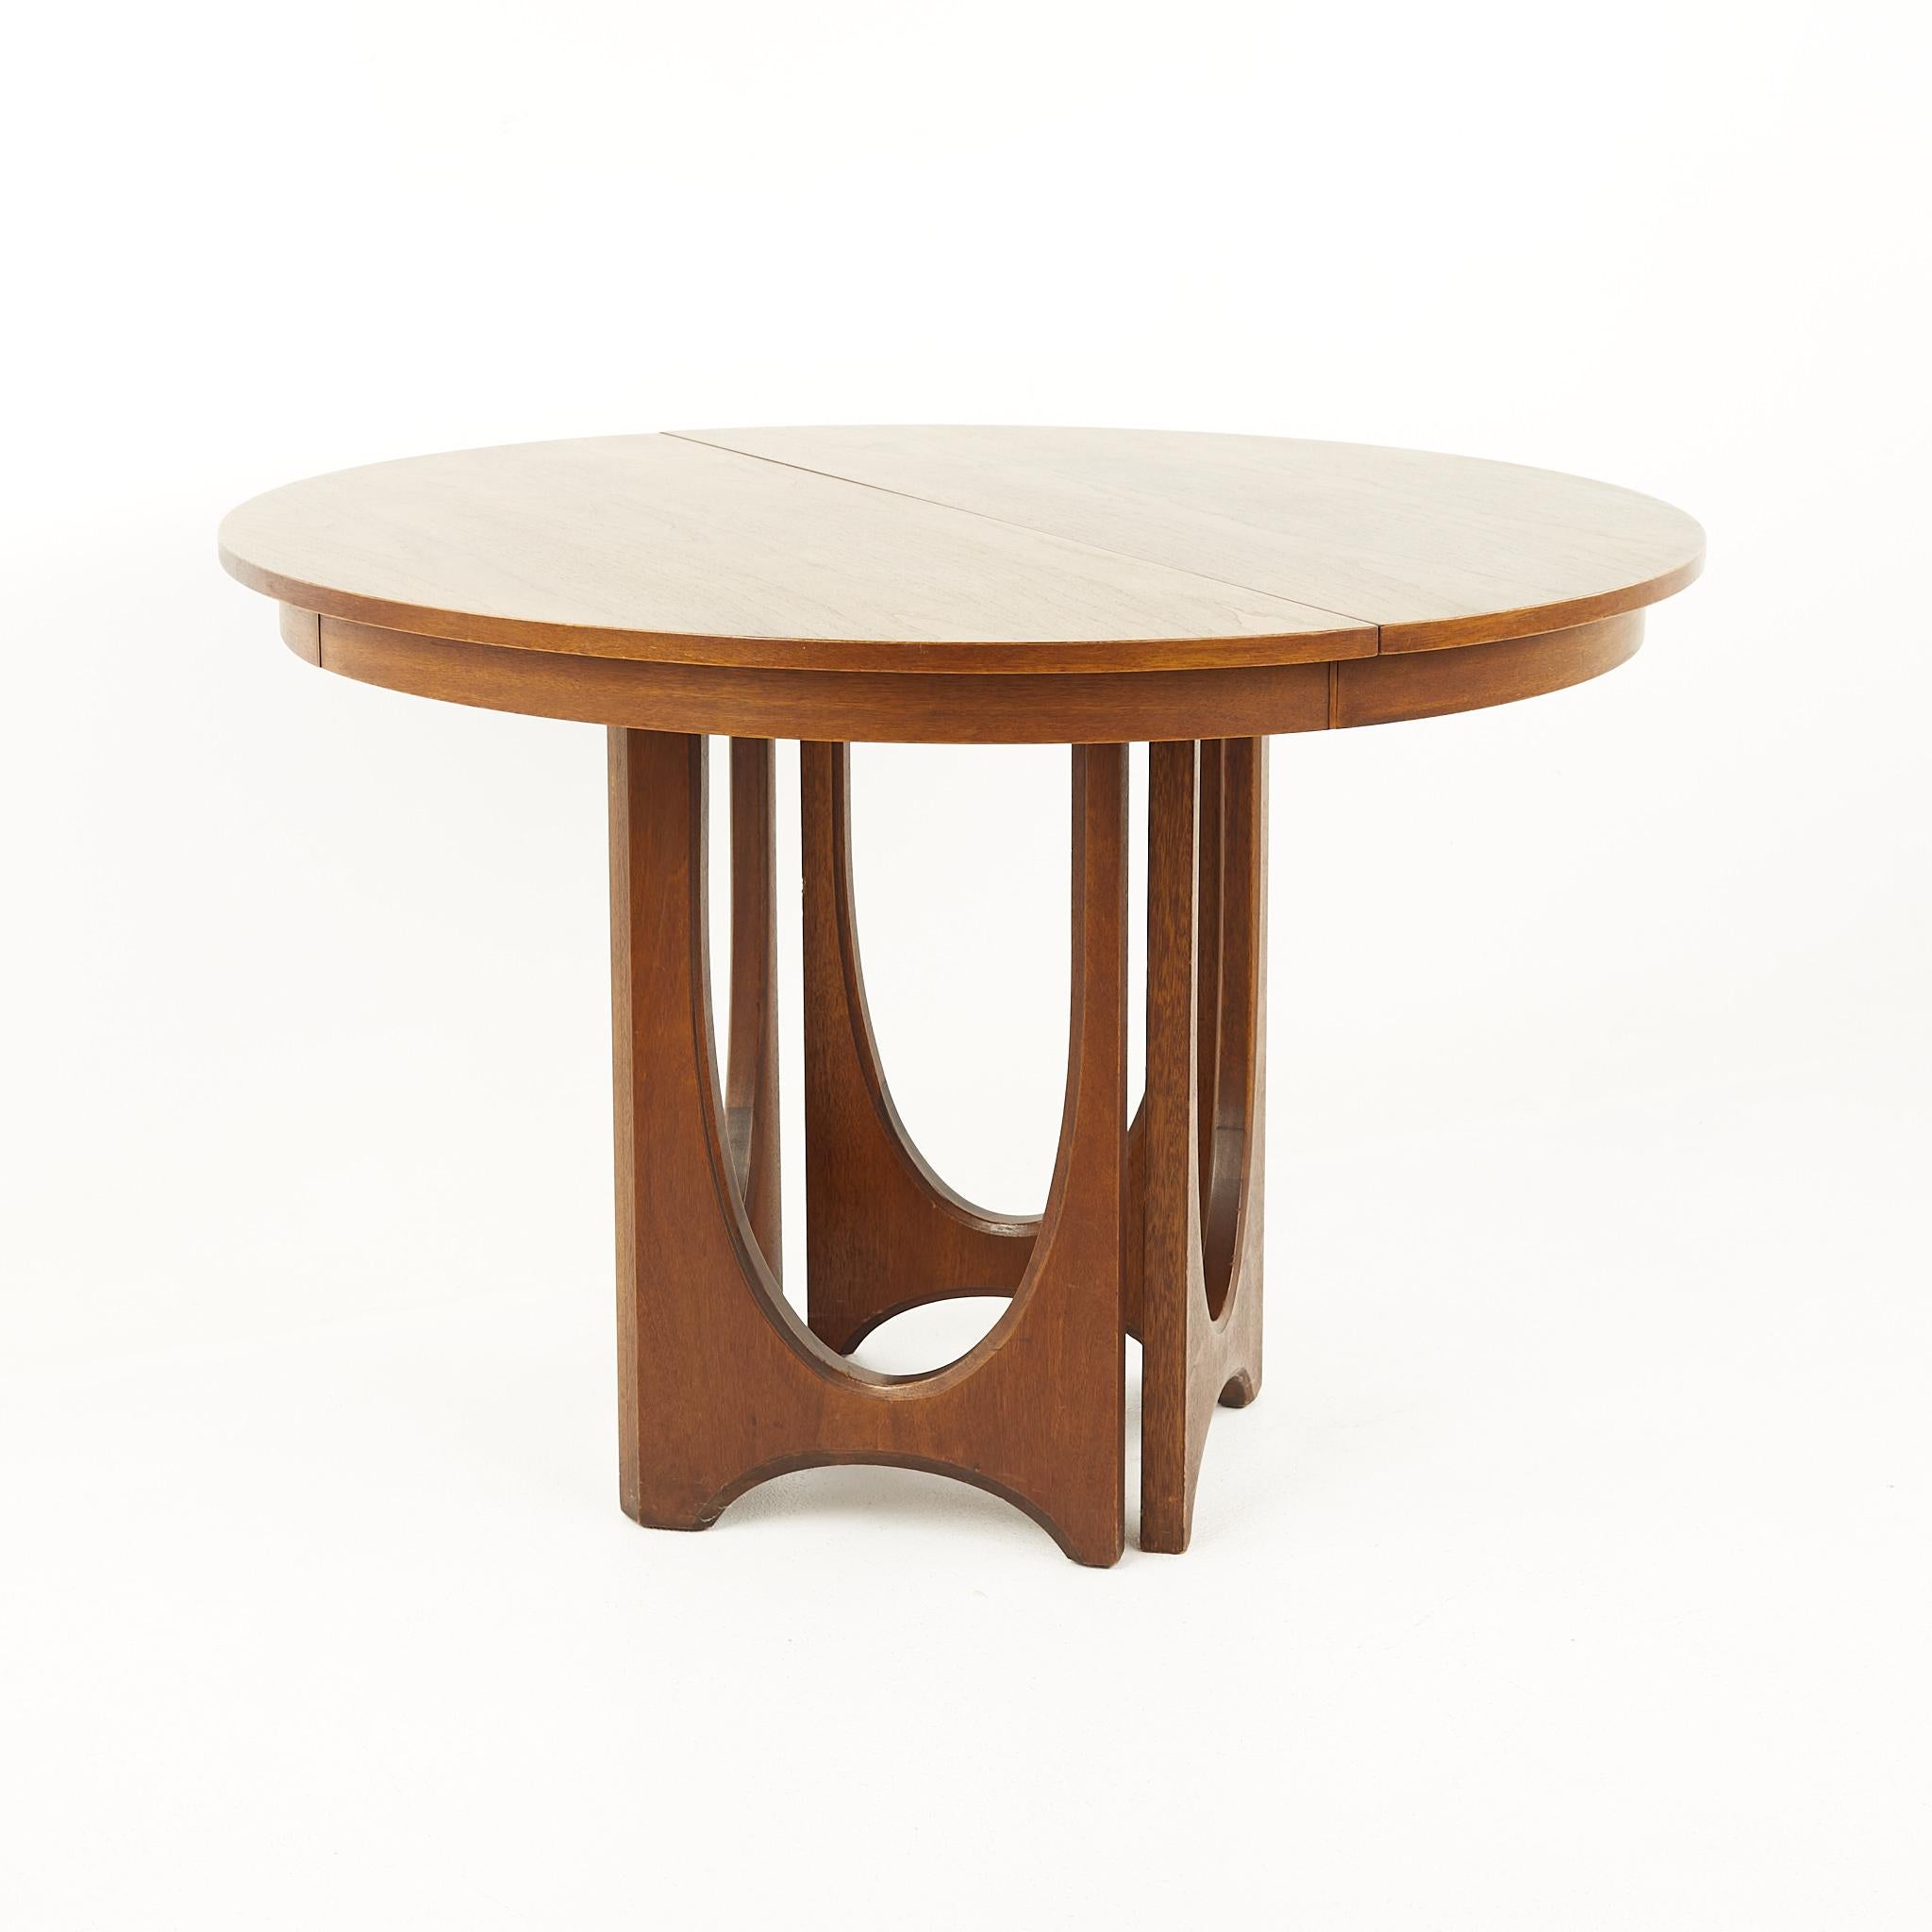 Broyhill Brasilia Mid Century Round Walnut Pedestal Dining Table - 2 Leaves

This table measures: 44 wide x 44 deep x 30 inches high, each leaf is 12.25 wide, making a maximum table width of 68.5 inches

All pieces of furniture can be had in